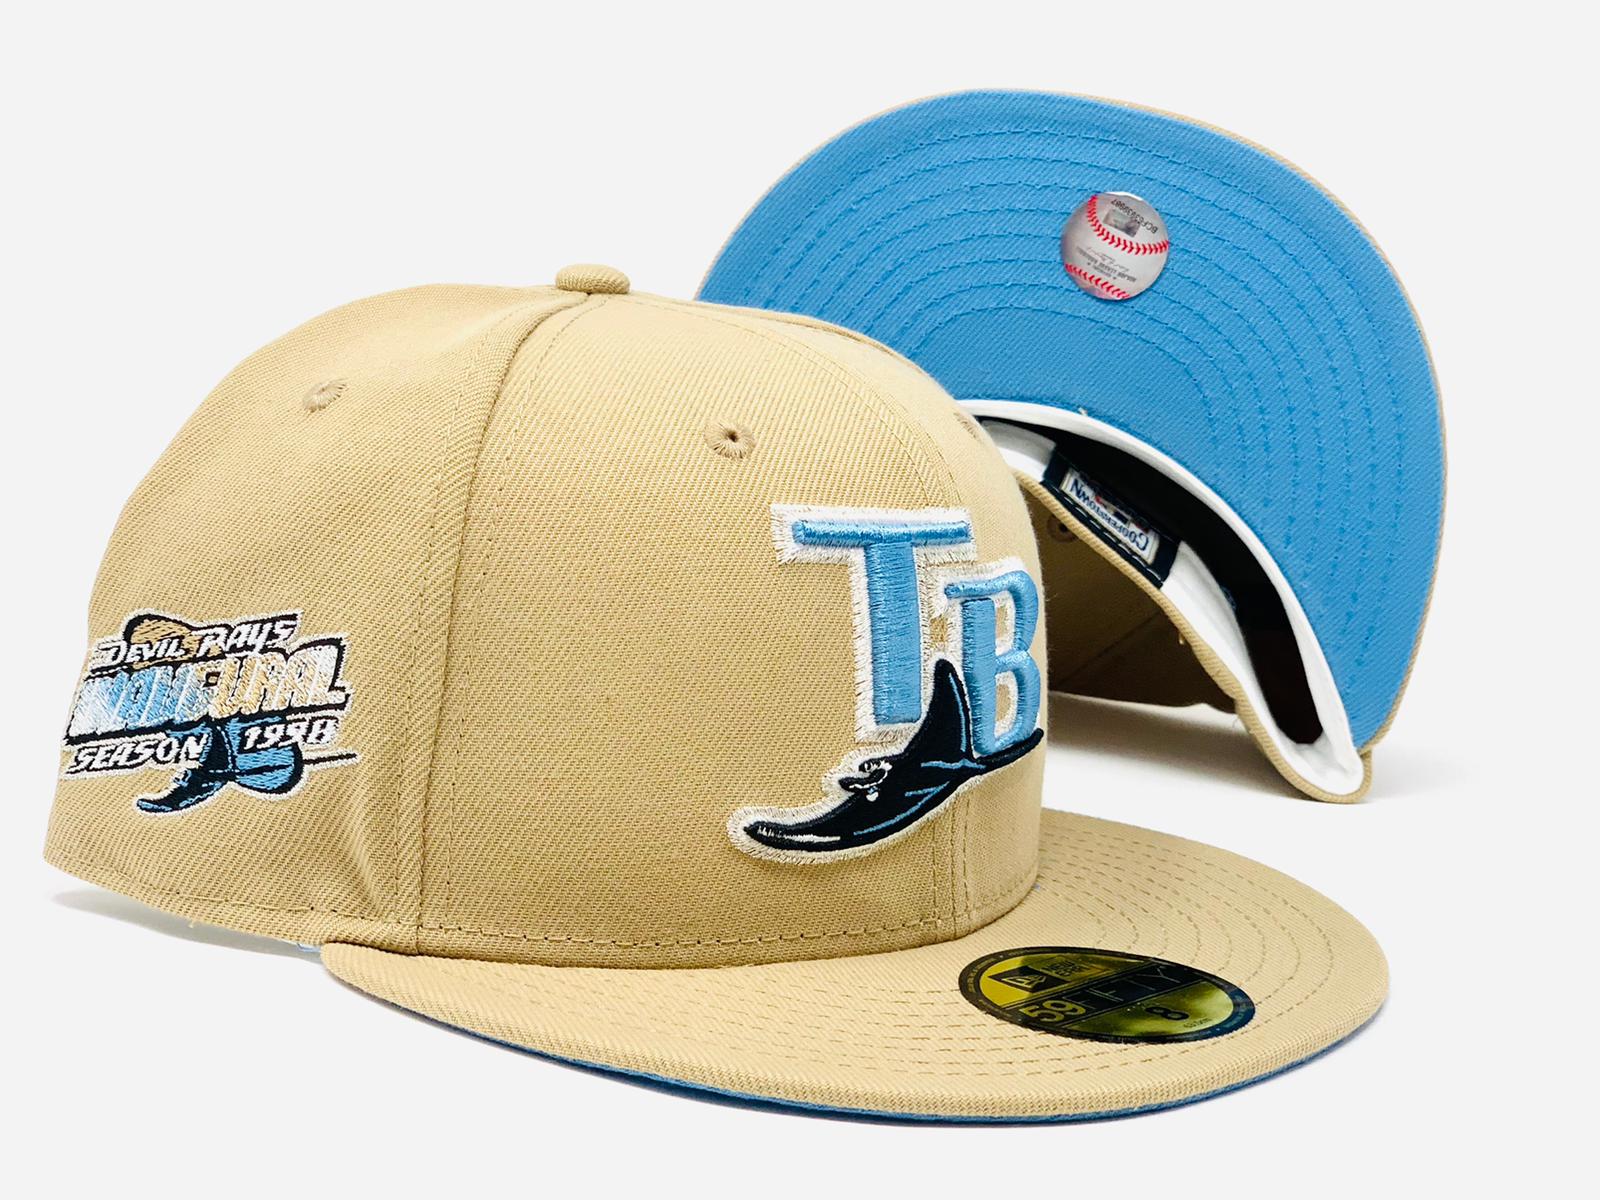 Tampa Bay Devil Rays (TB) (1998-2000 Game) New Era 59FIFTY Fitted (Grey BRIM)